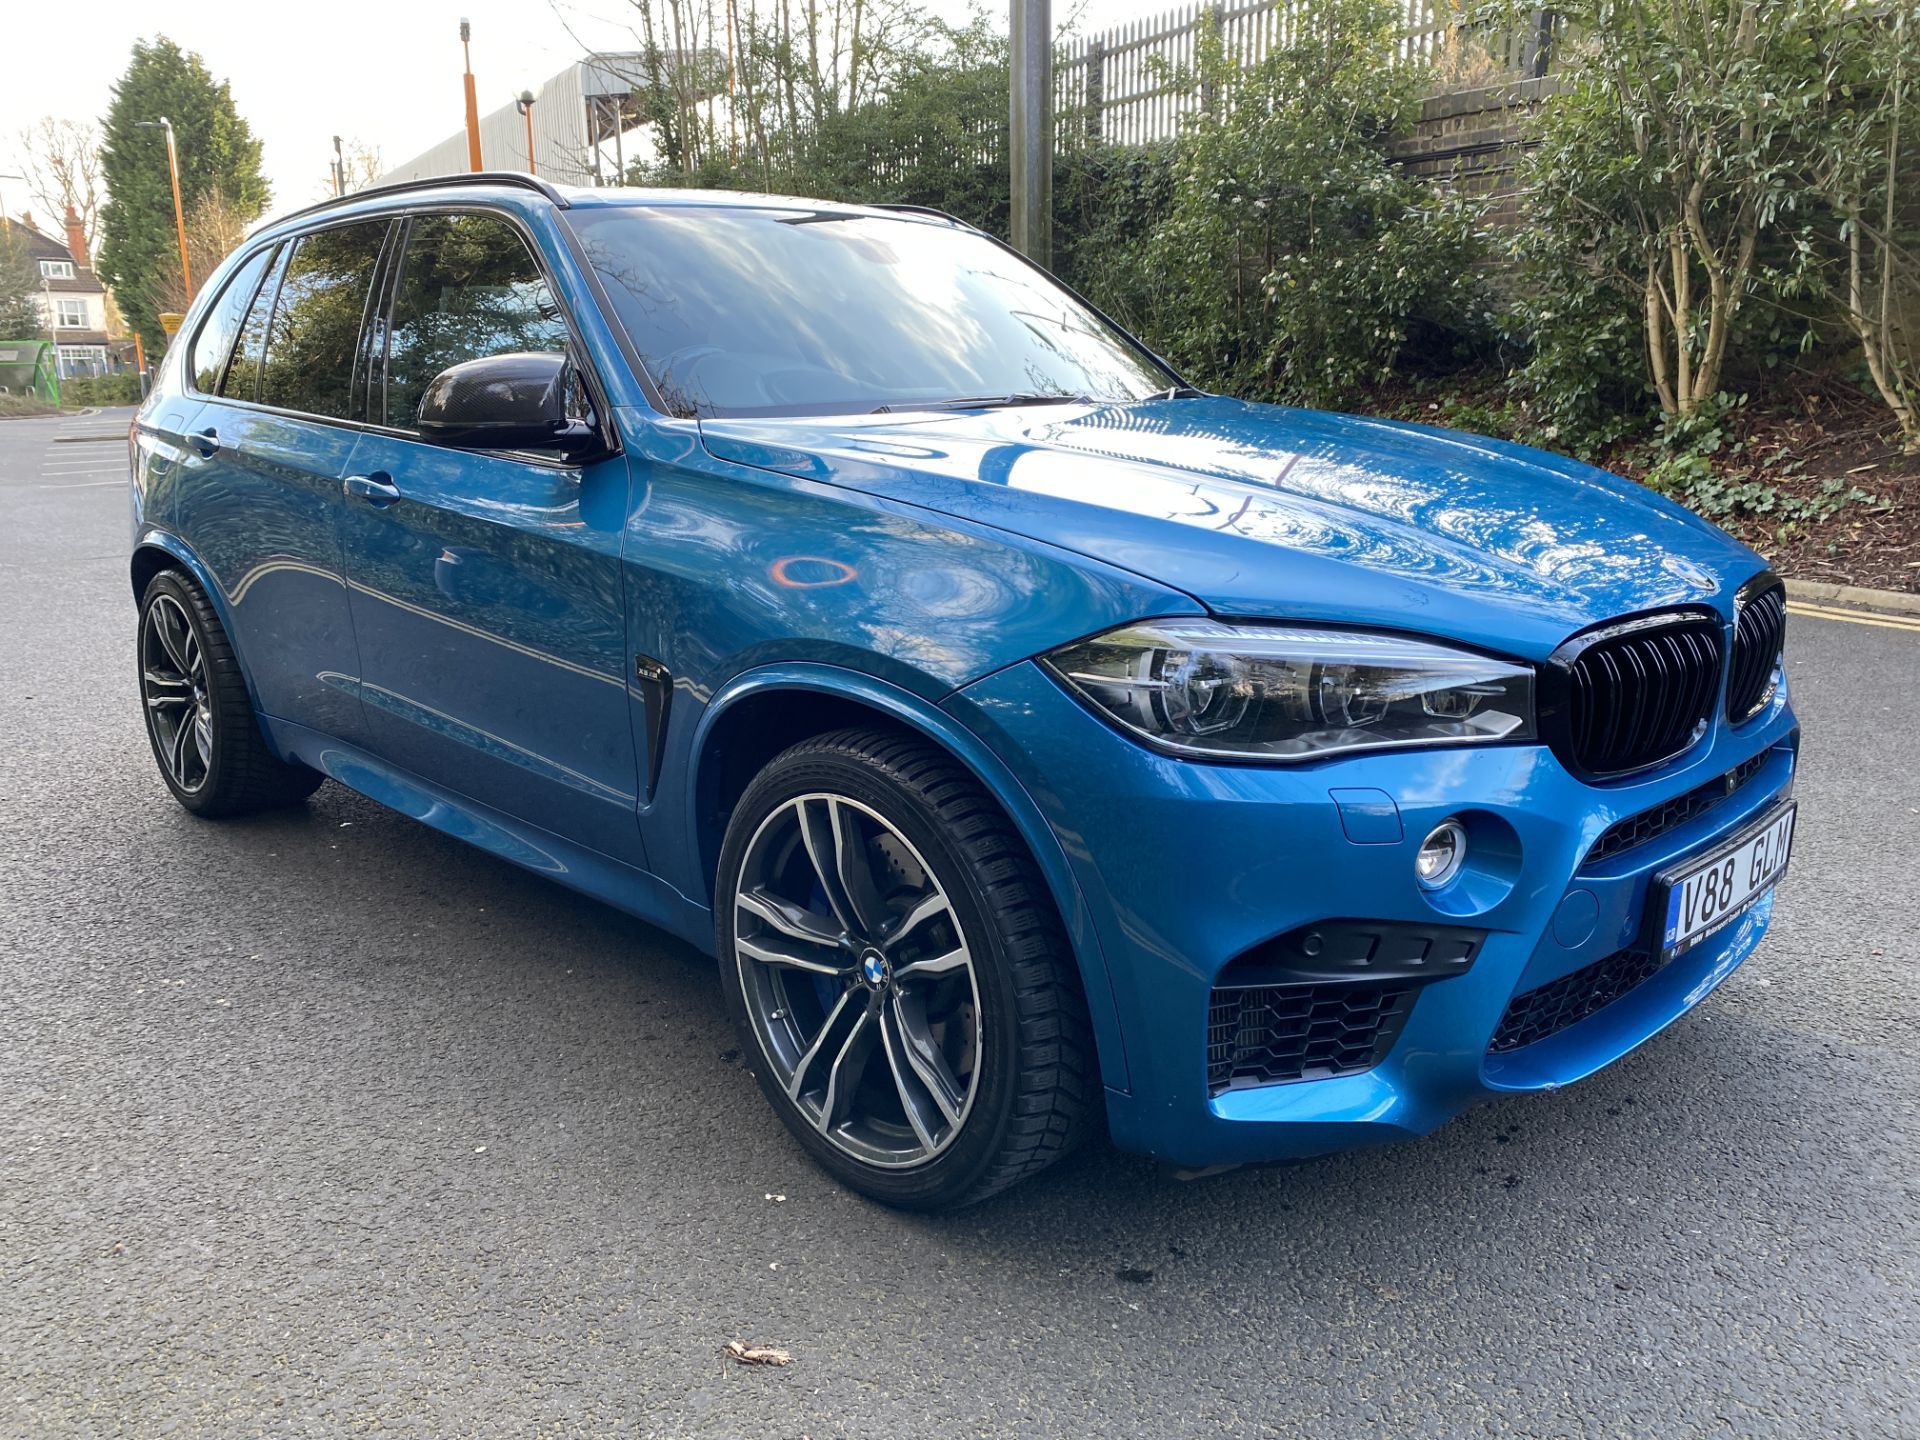 BMW X5 M - 2017 Fully Loaded Example Cost Over £100,000 When New £8k Options Fitted - Image 9 of 66